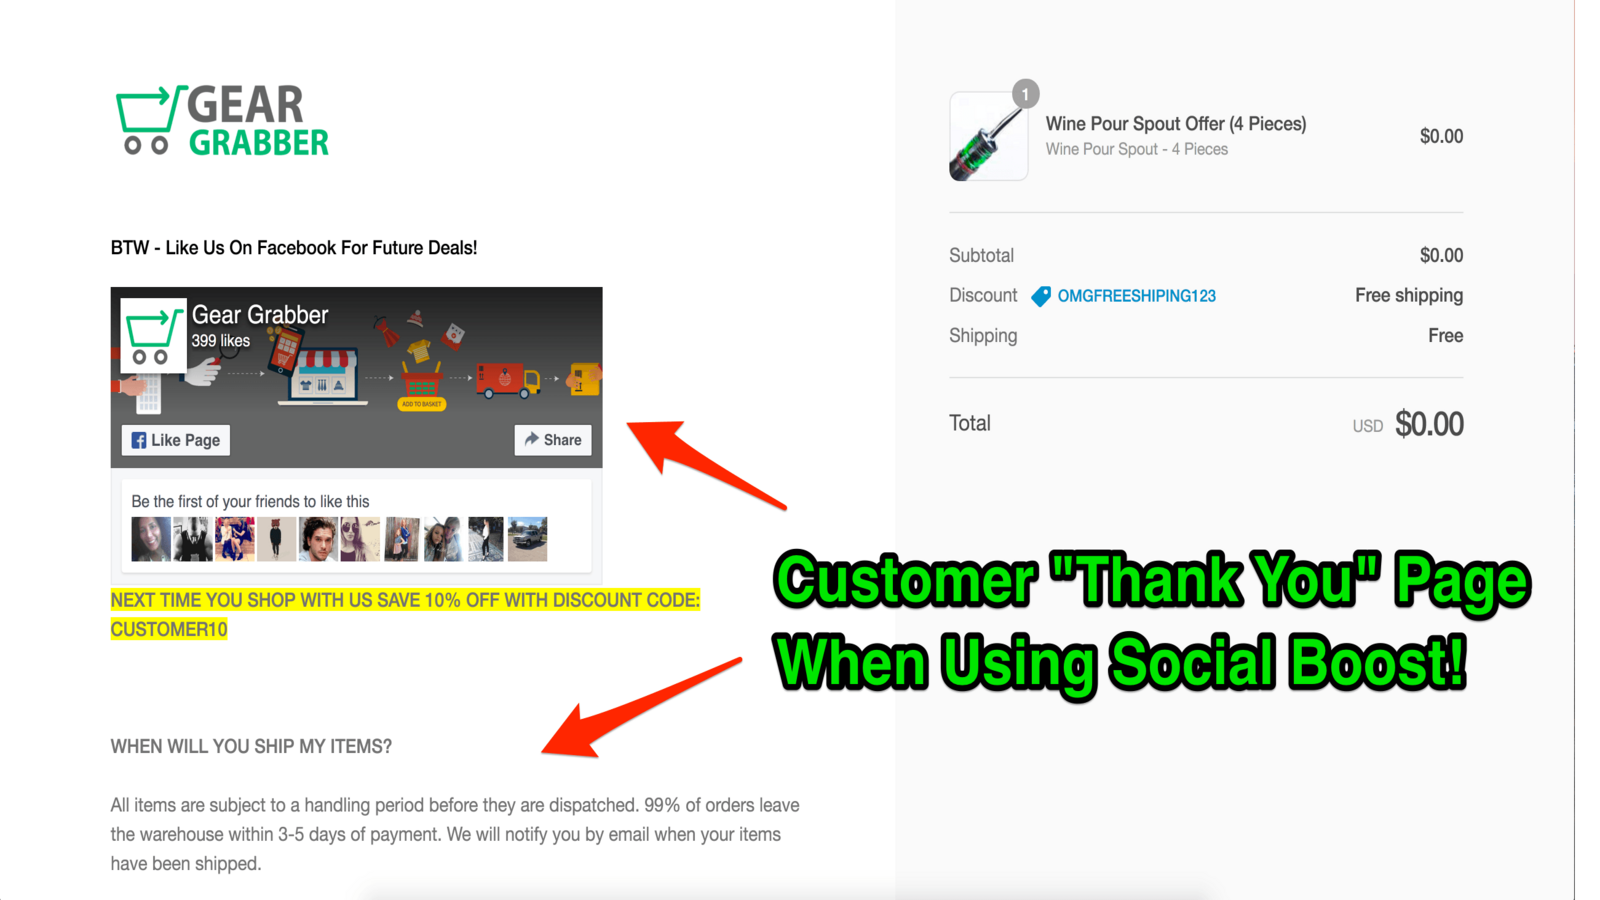 Customer Thank You Page when using Socialboost